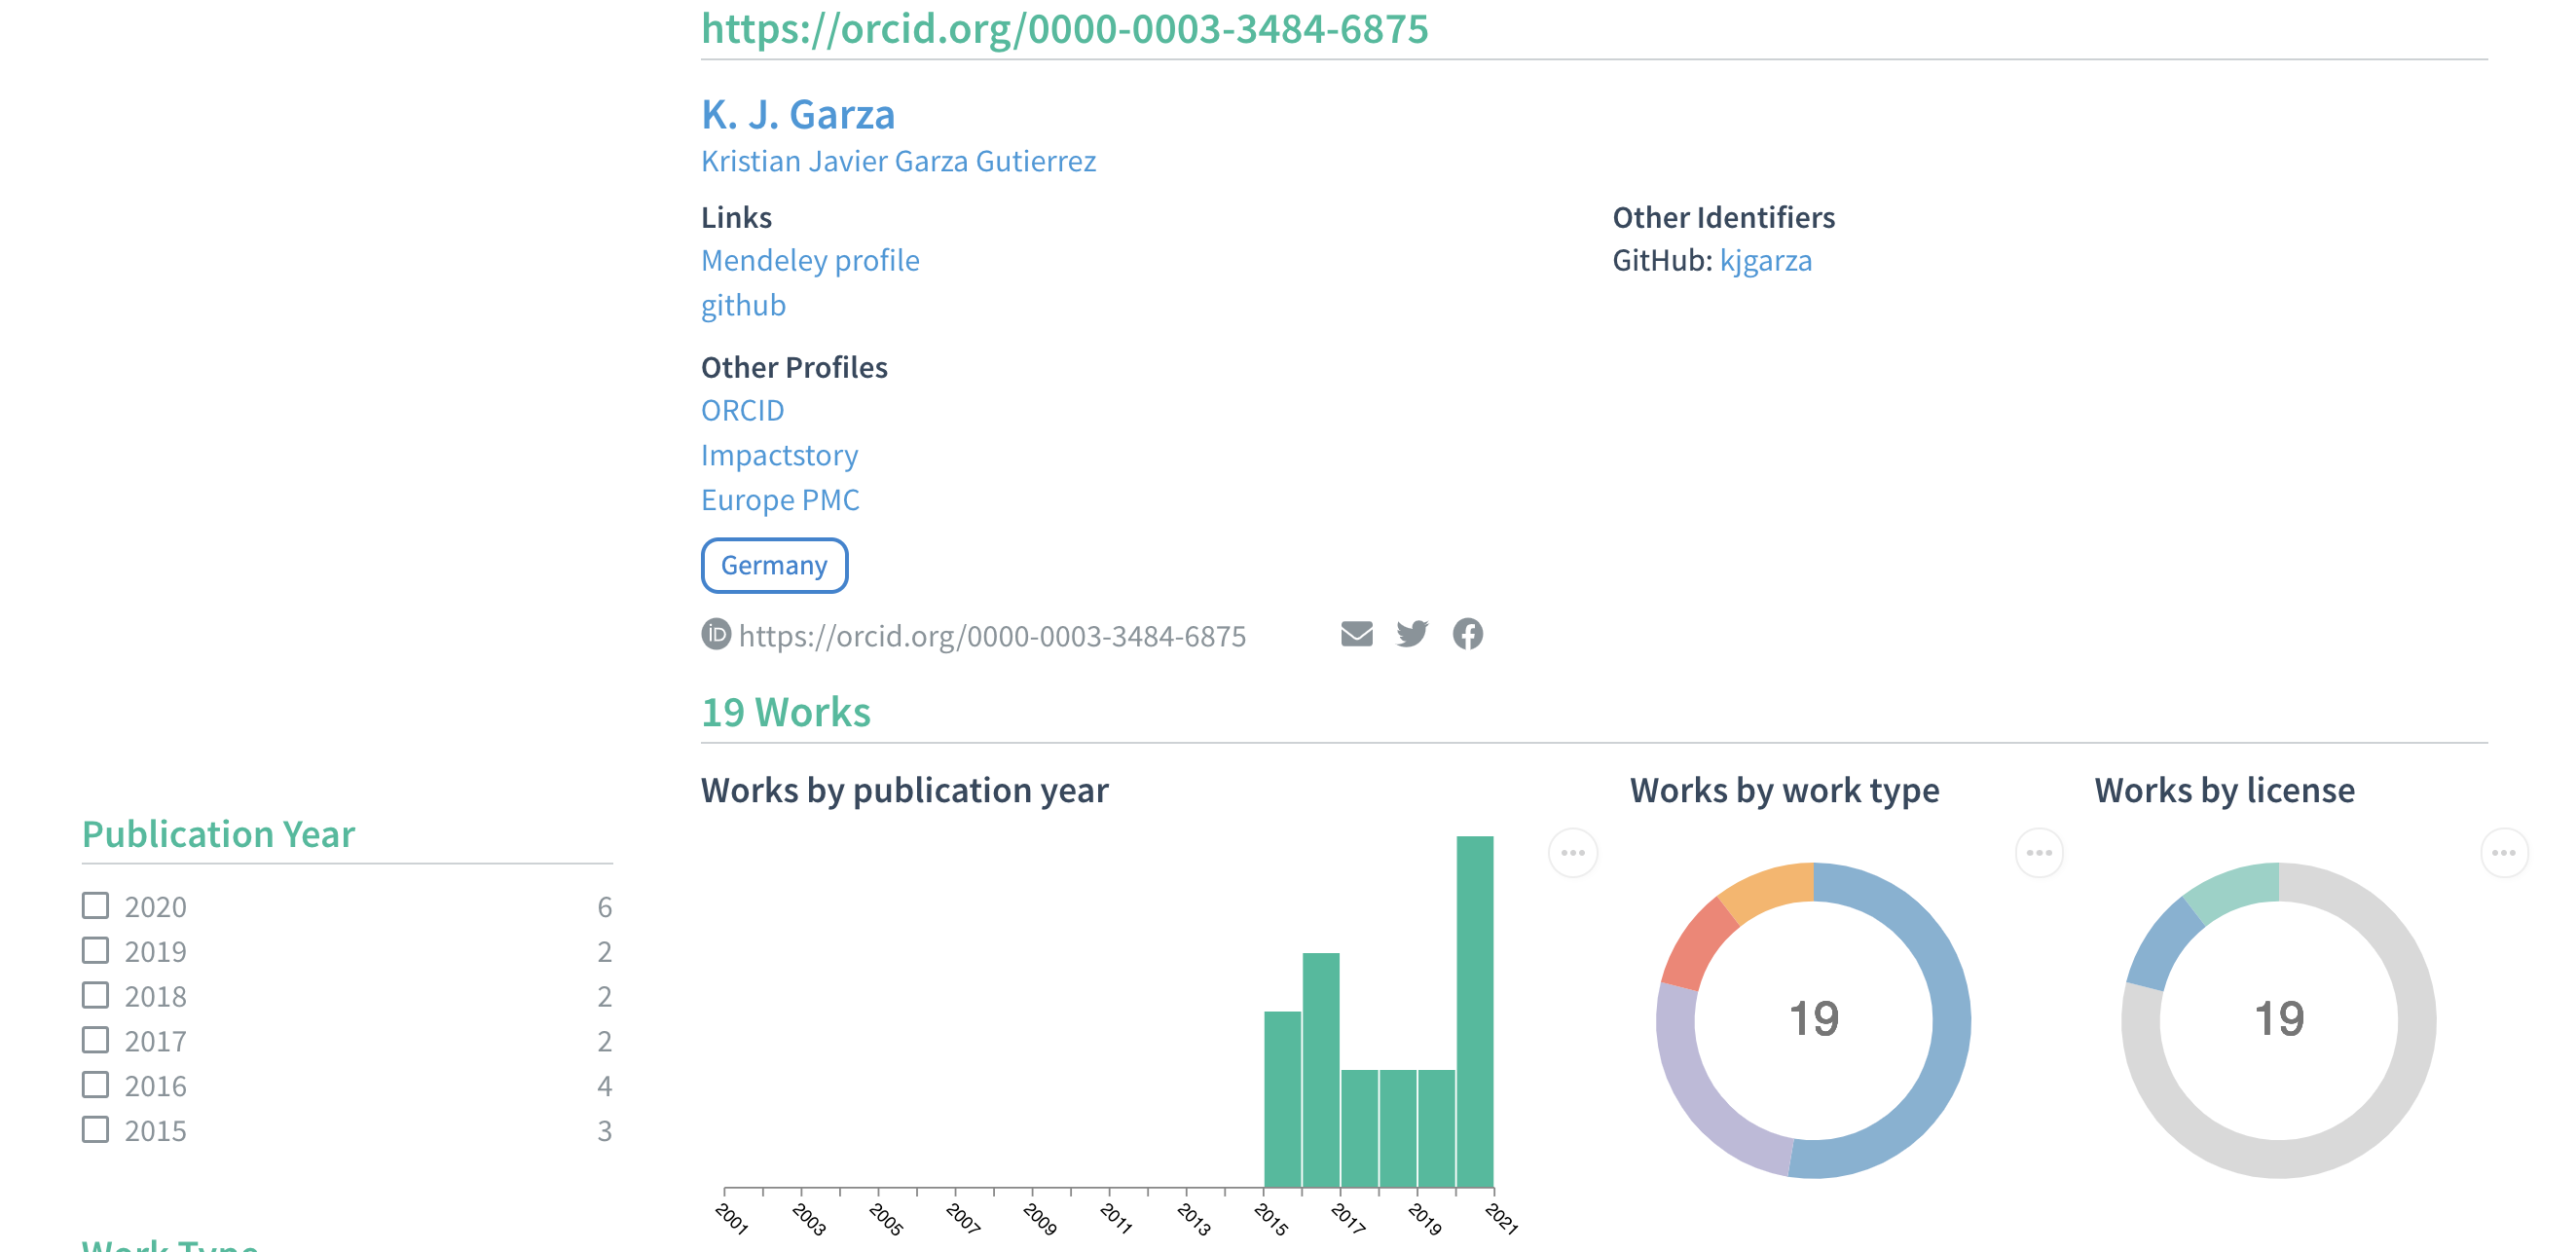 Works by person with summary statistics https://commons.datacite.org/orcid.org/0000-0003-3484-6875